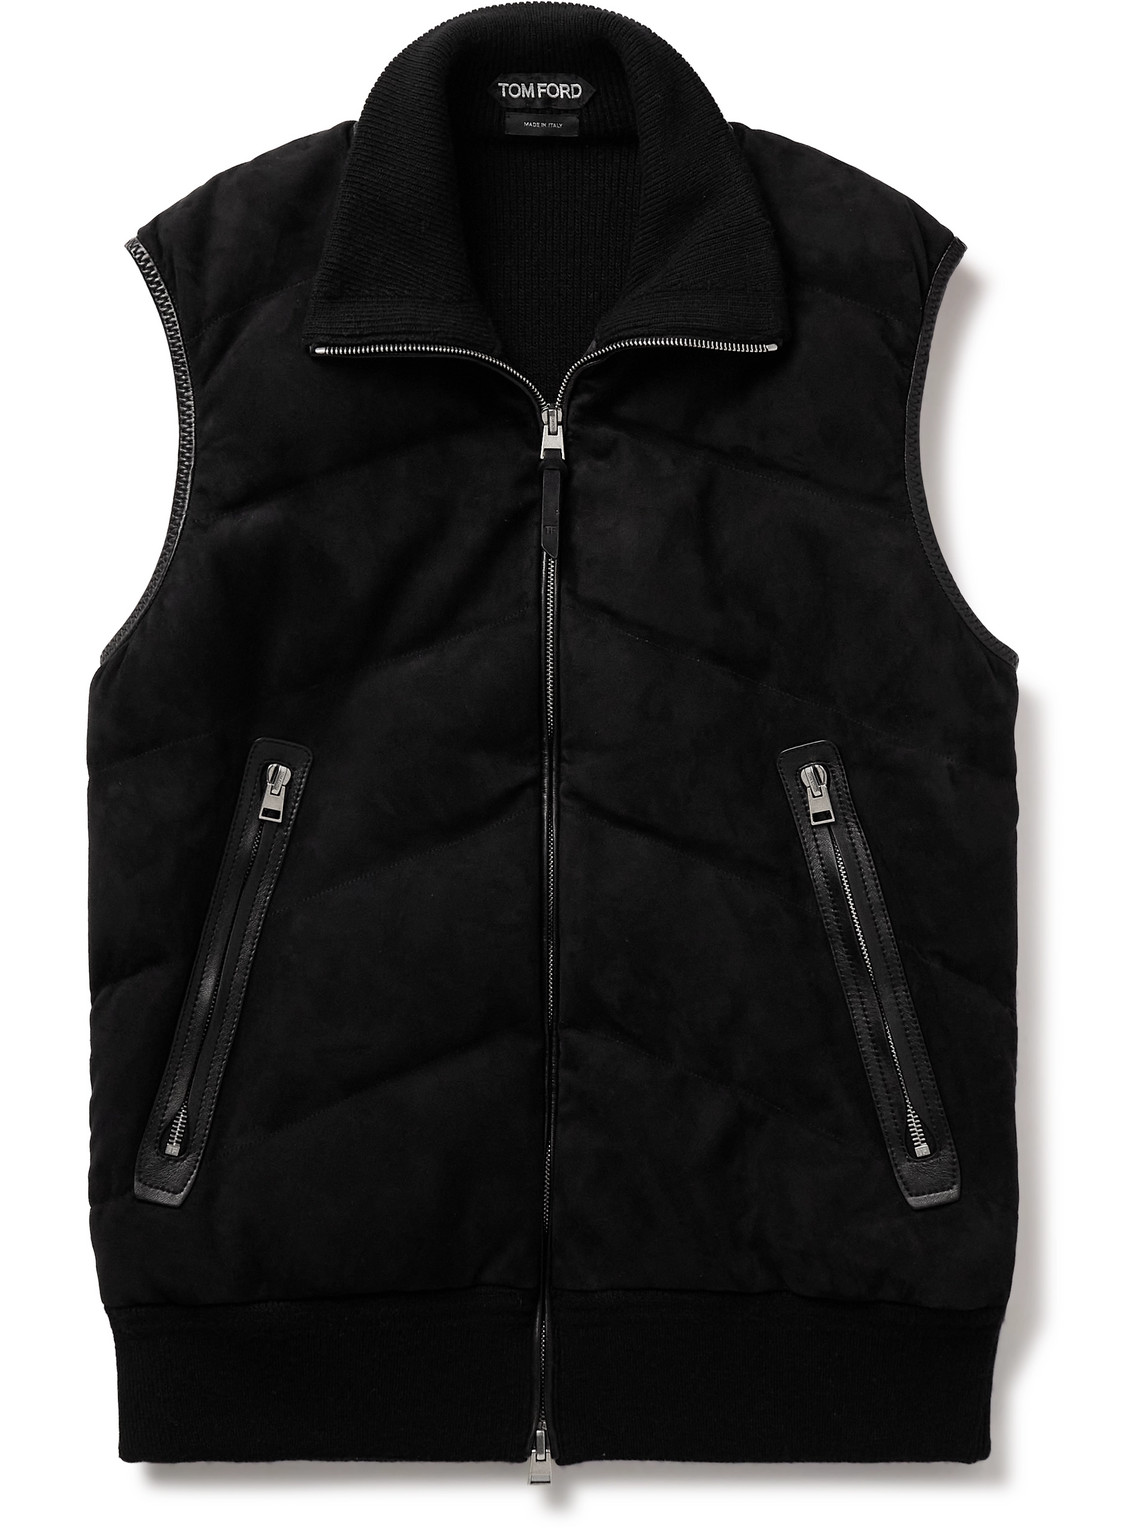 TOM FORD - Slim-Fit Quilted Suede-Panelled Wool and Cashmere-Blend Down Gilet - Men - Black - IT 48 von TOM FORD